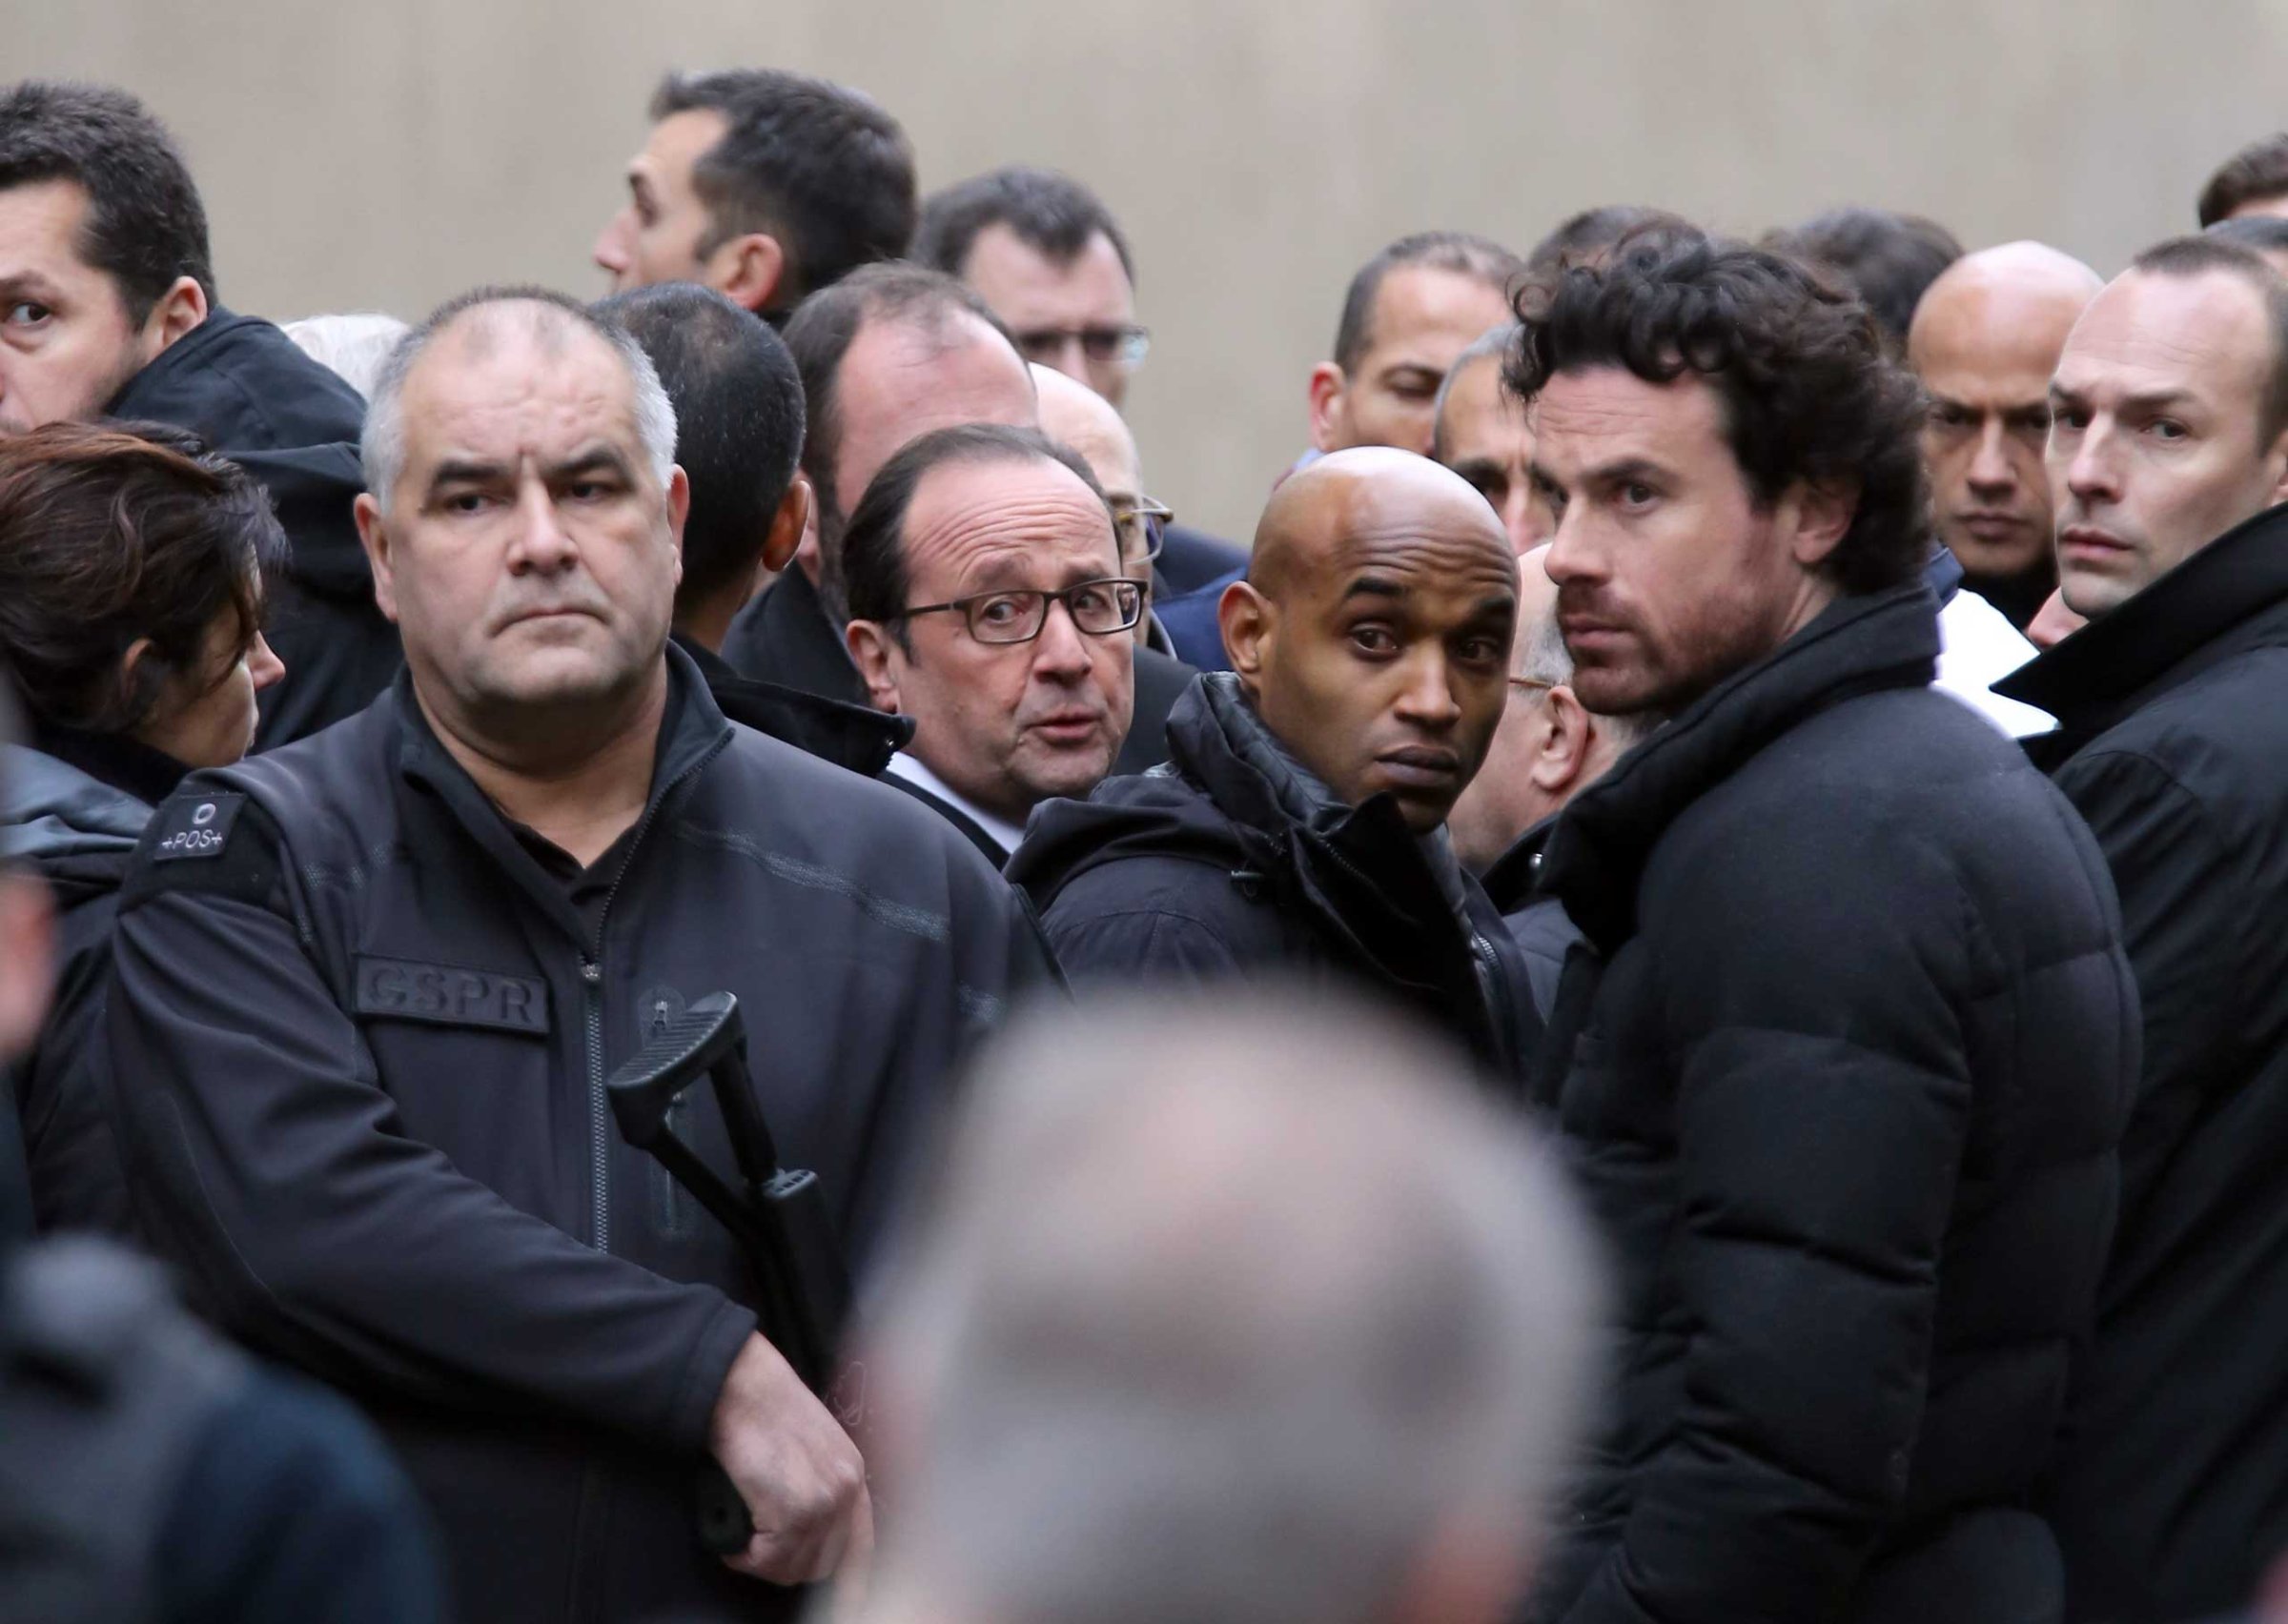 President Francois Hollande, center, flanked with security forces arrives outside the French satirical newspaper Charlie Hebdo's office, in Paris, Jan. 7, 2015.